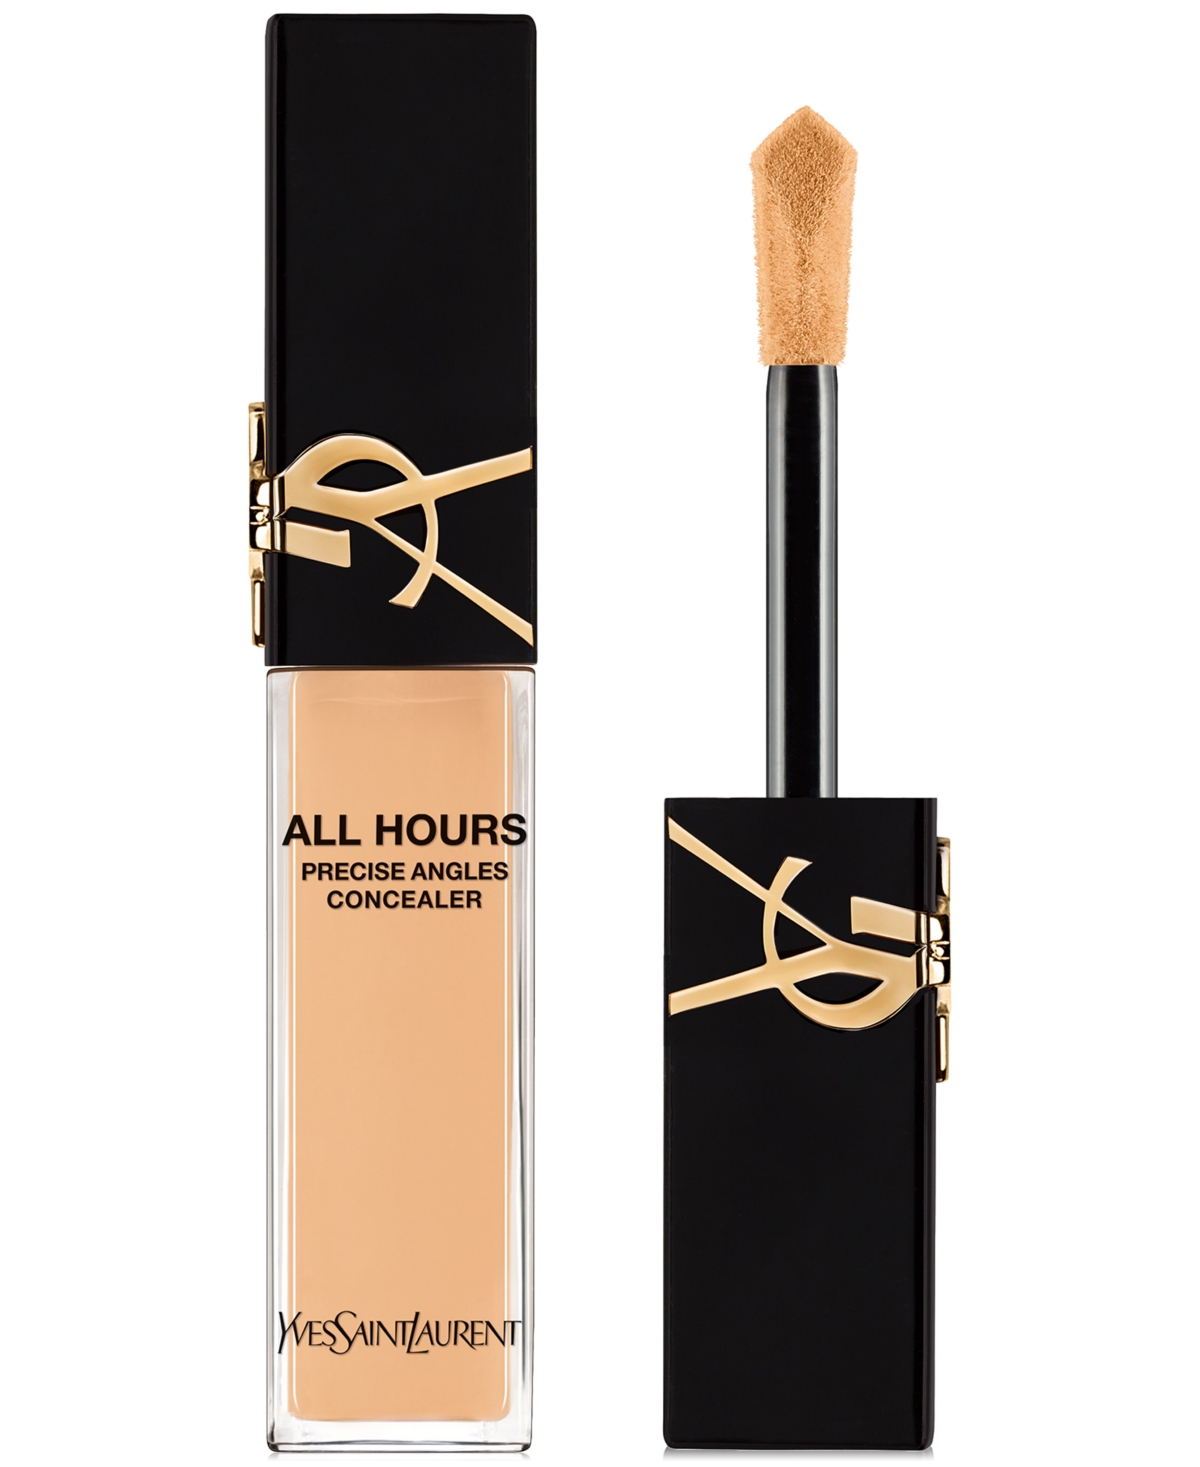 Saint Laurent All Hours Precise Angles Full-coverage Concealer In Light Shade With Neutral Undertones